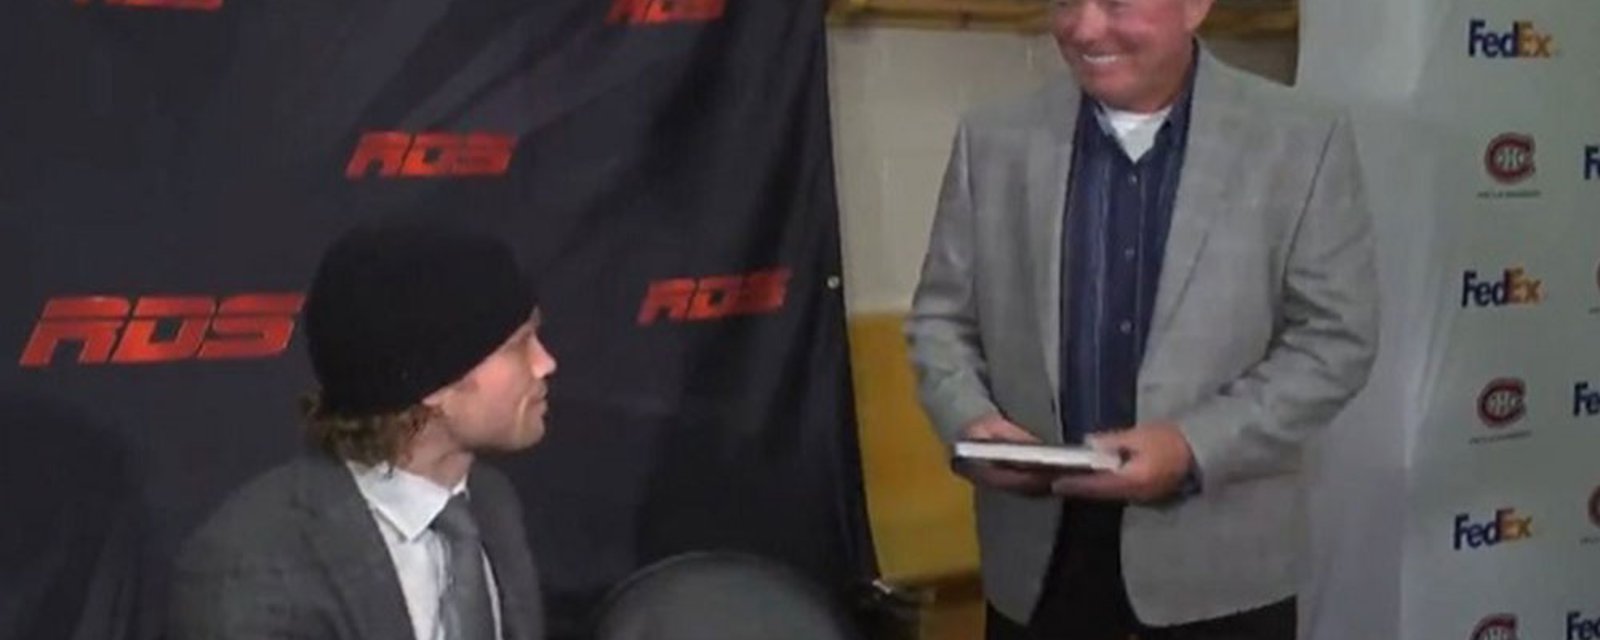 Bobby Clarke and Max Domi shared a special moment before tonight's game